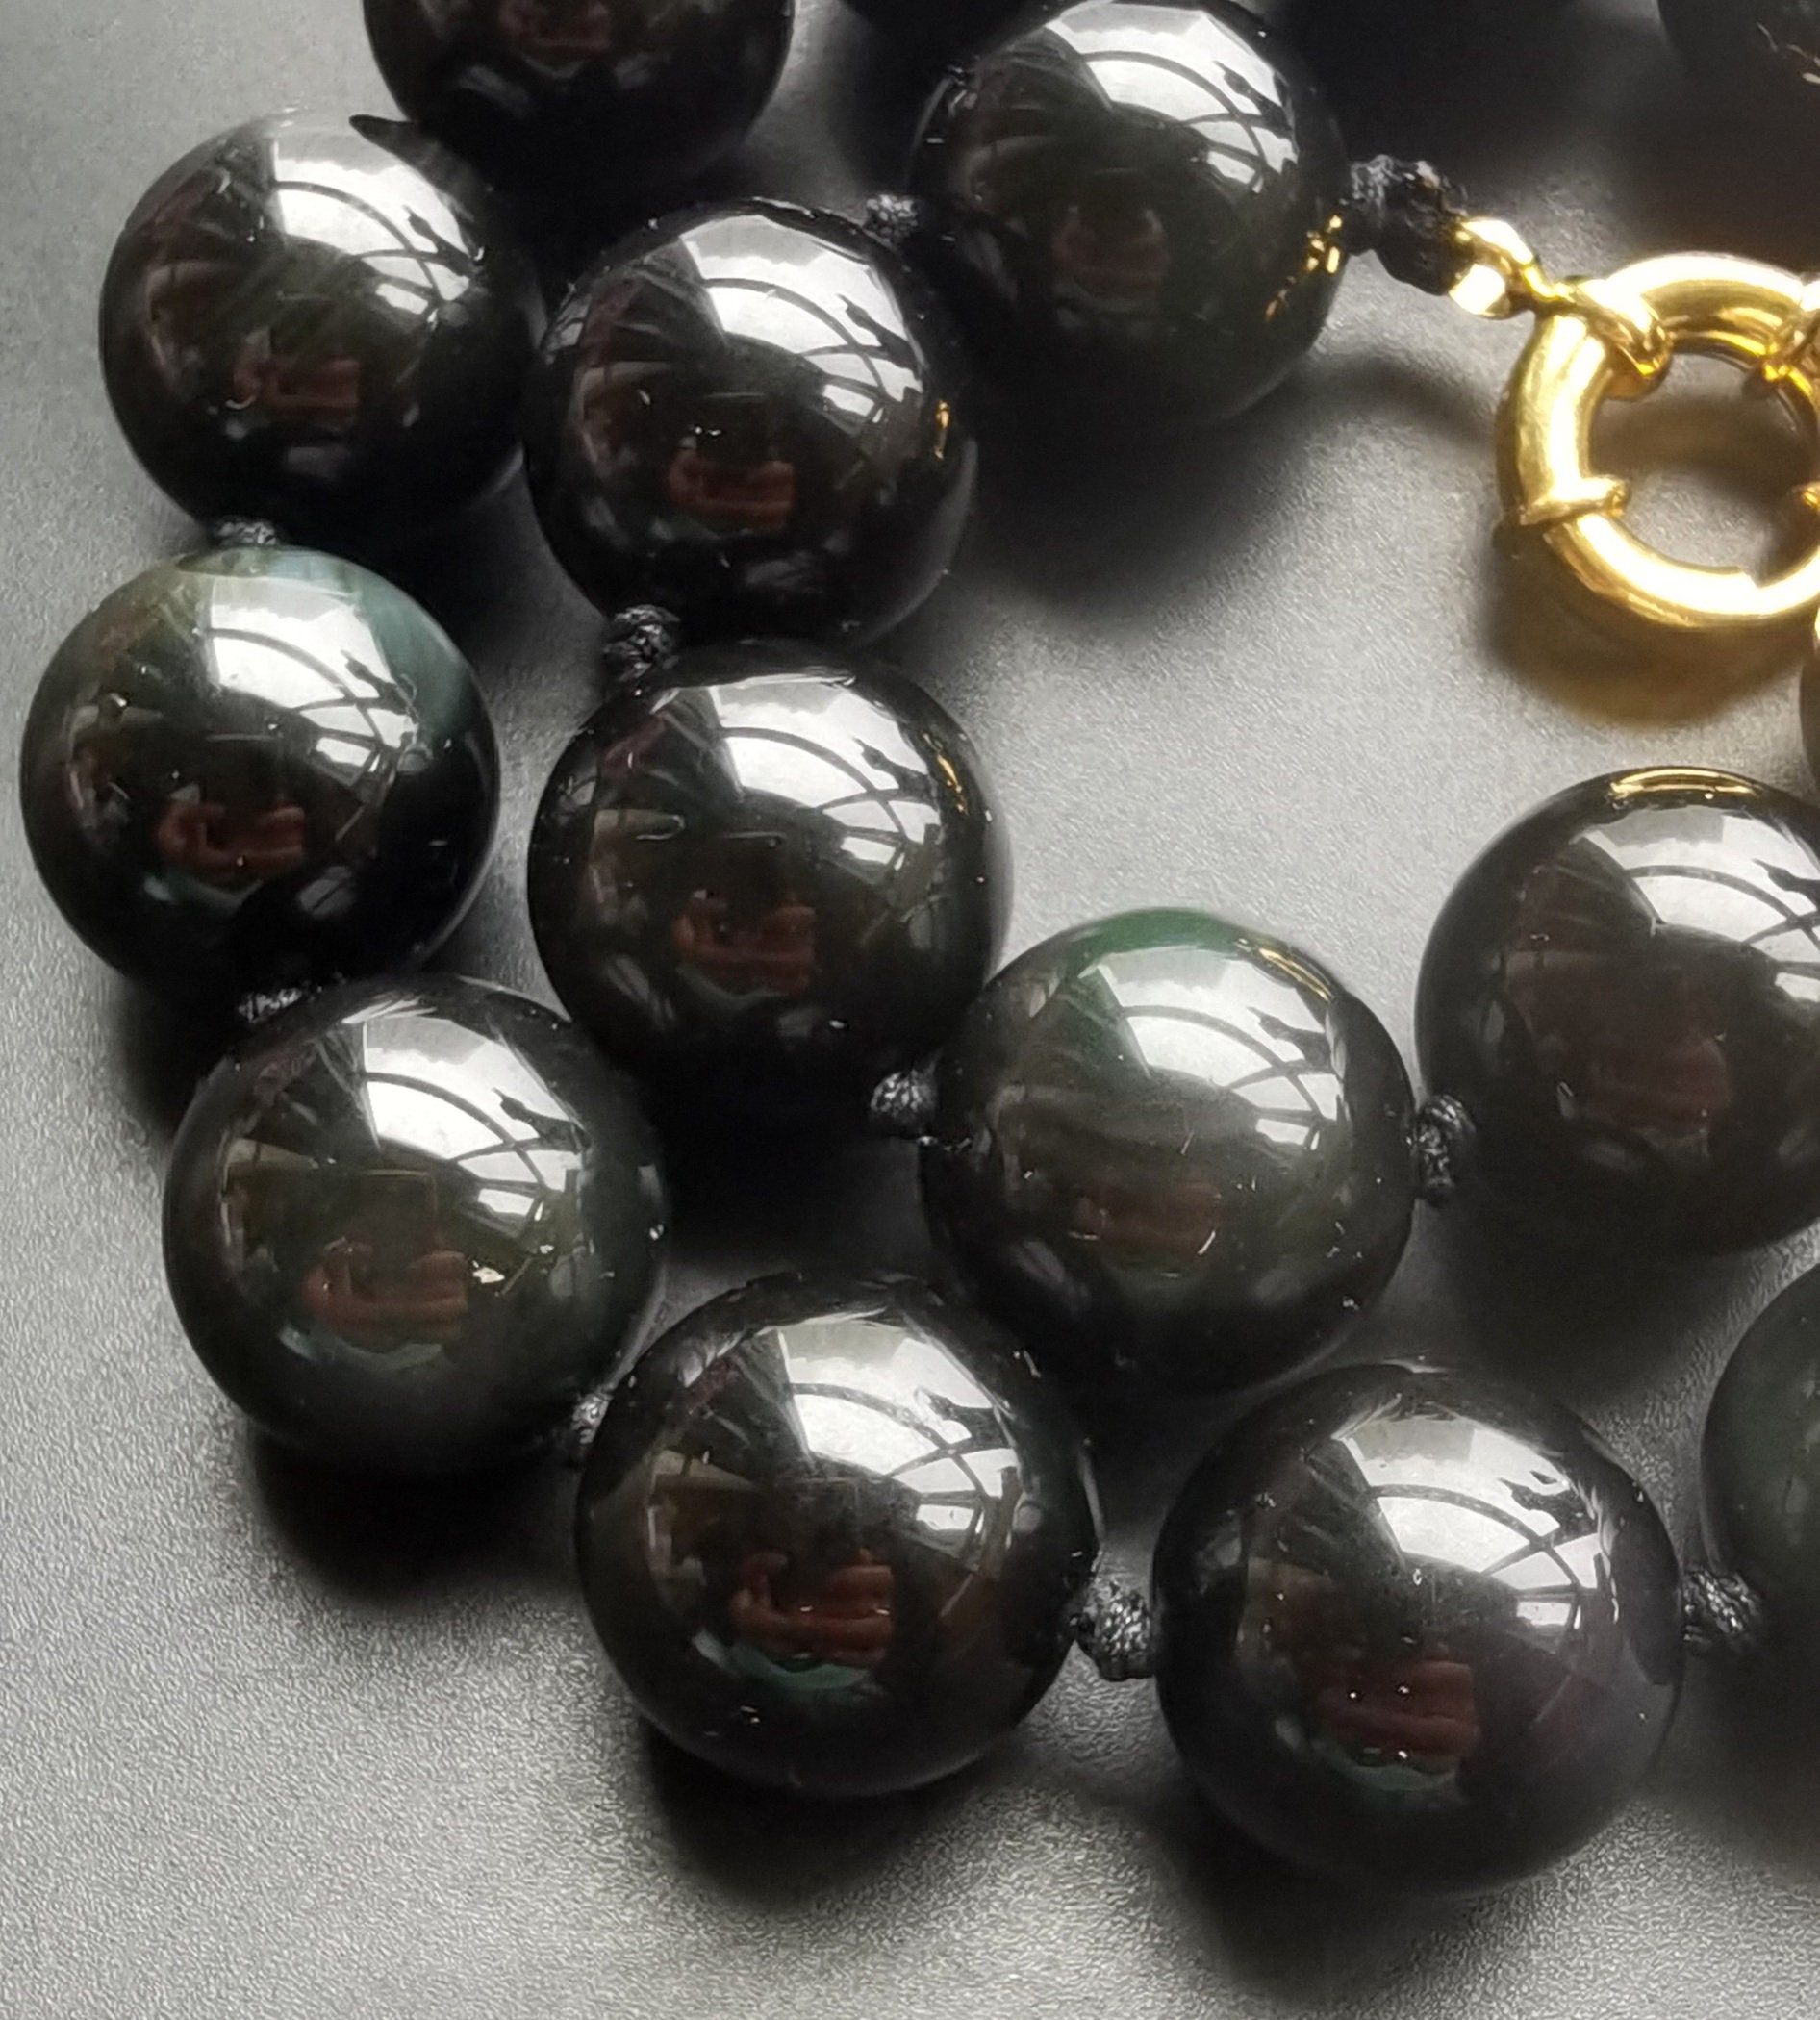 Hip Hop Natural Obsidian Round Pearl Necklace Hip-hop Hipster Personality  Element Chain Men And Women Black Necklace#mcsp054